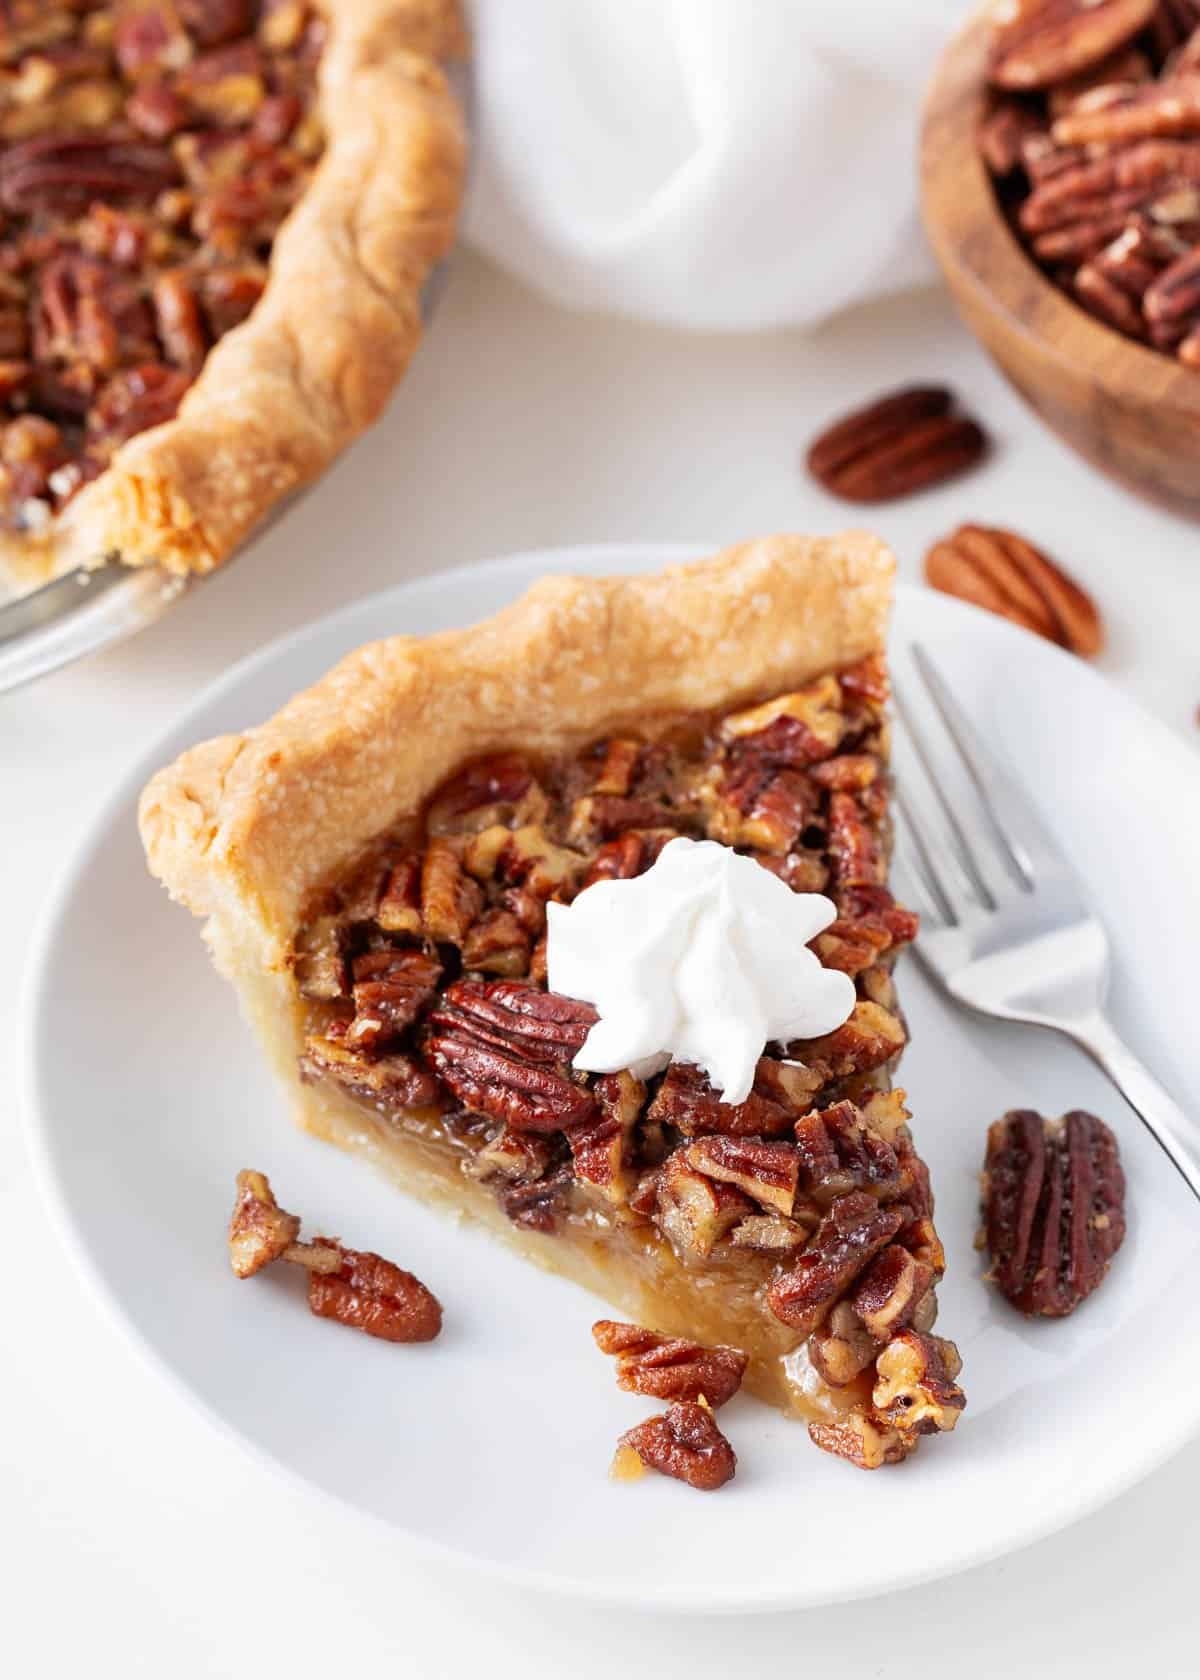 Slice of pecan pie on a white plate.